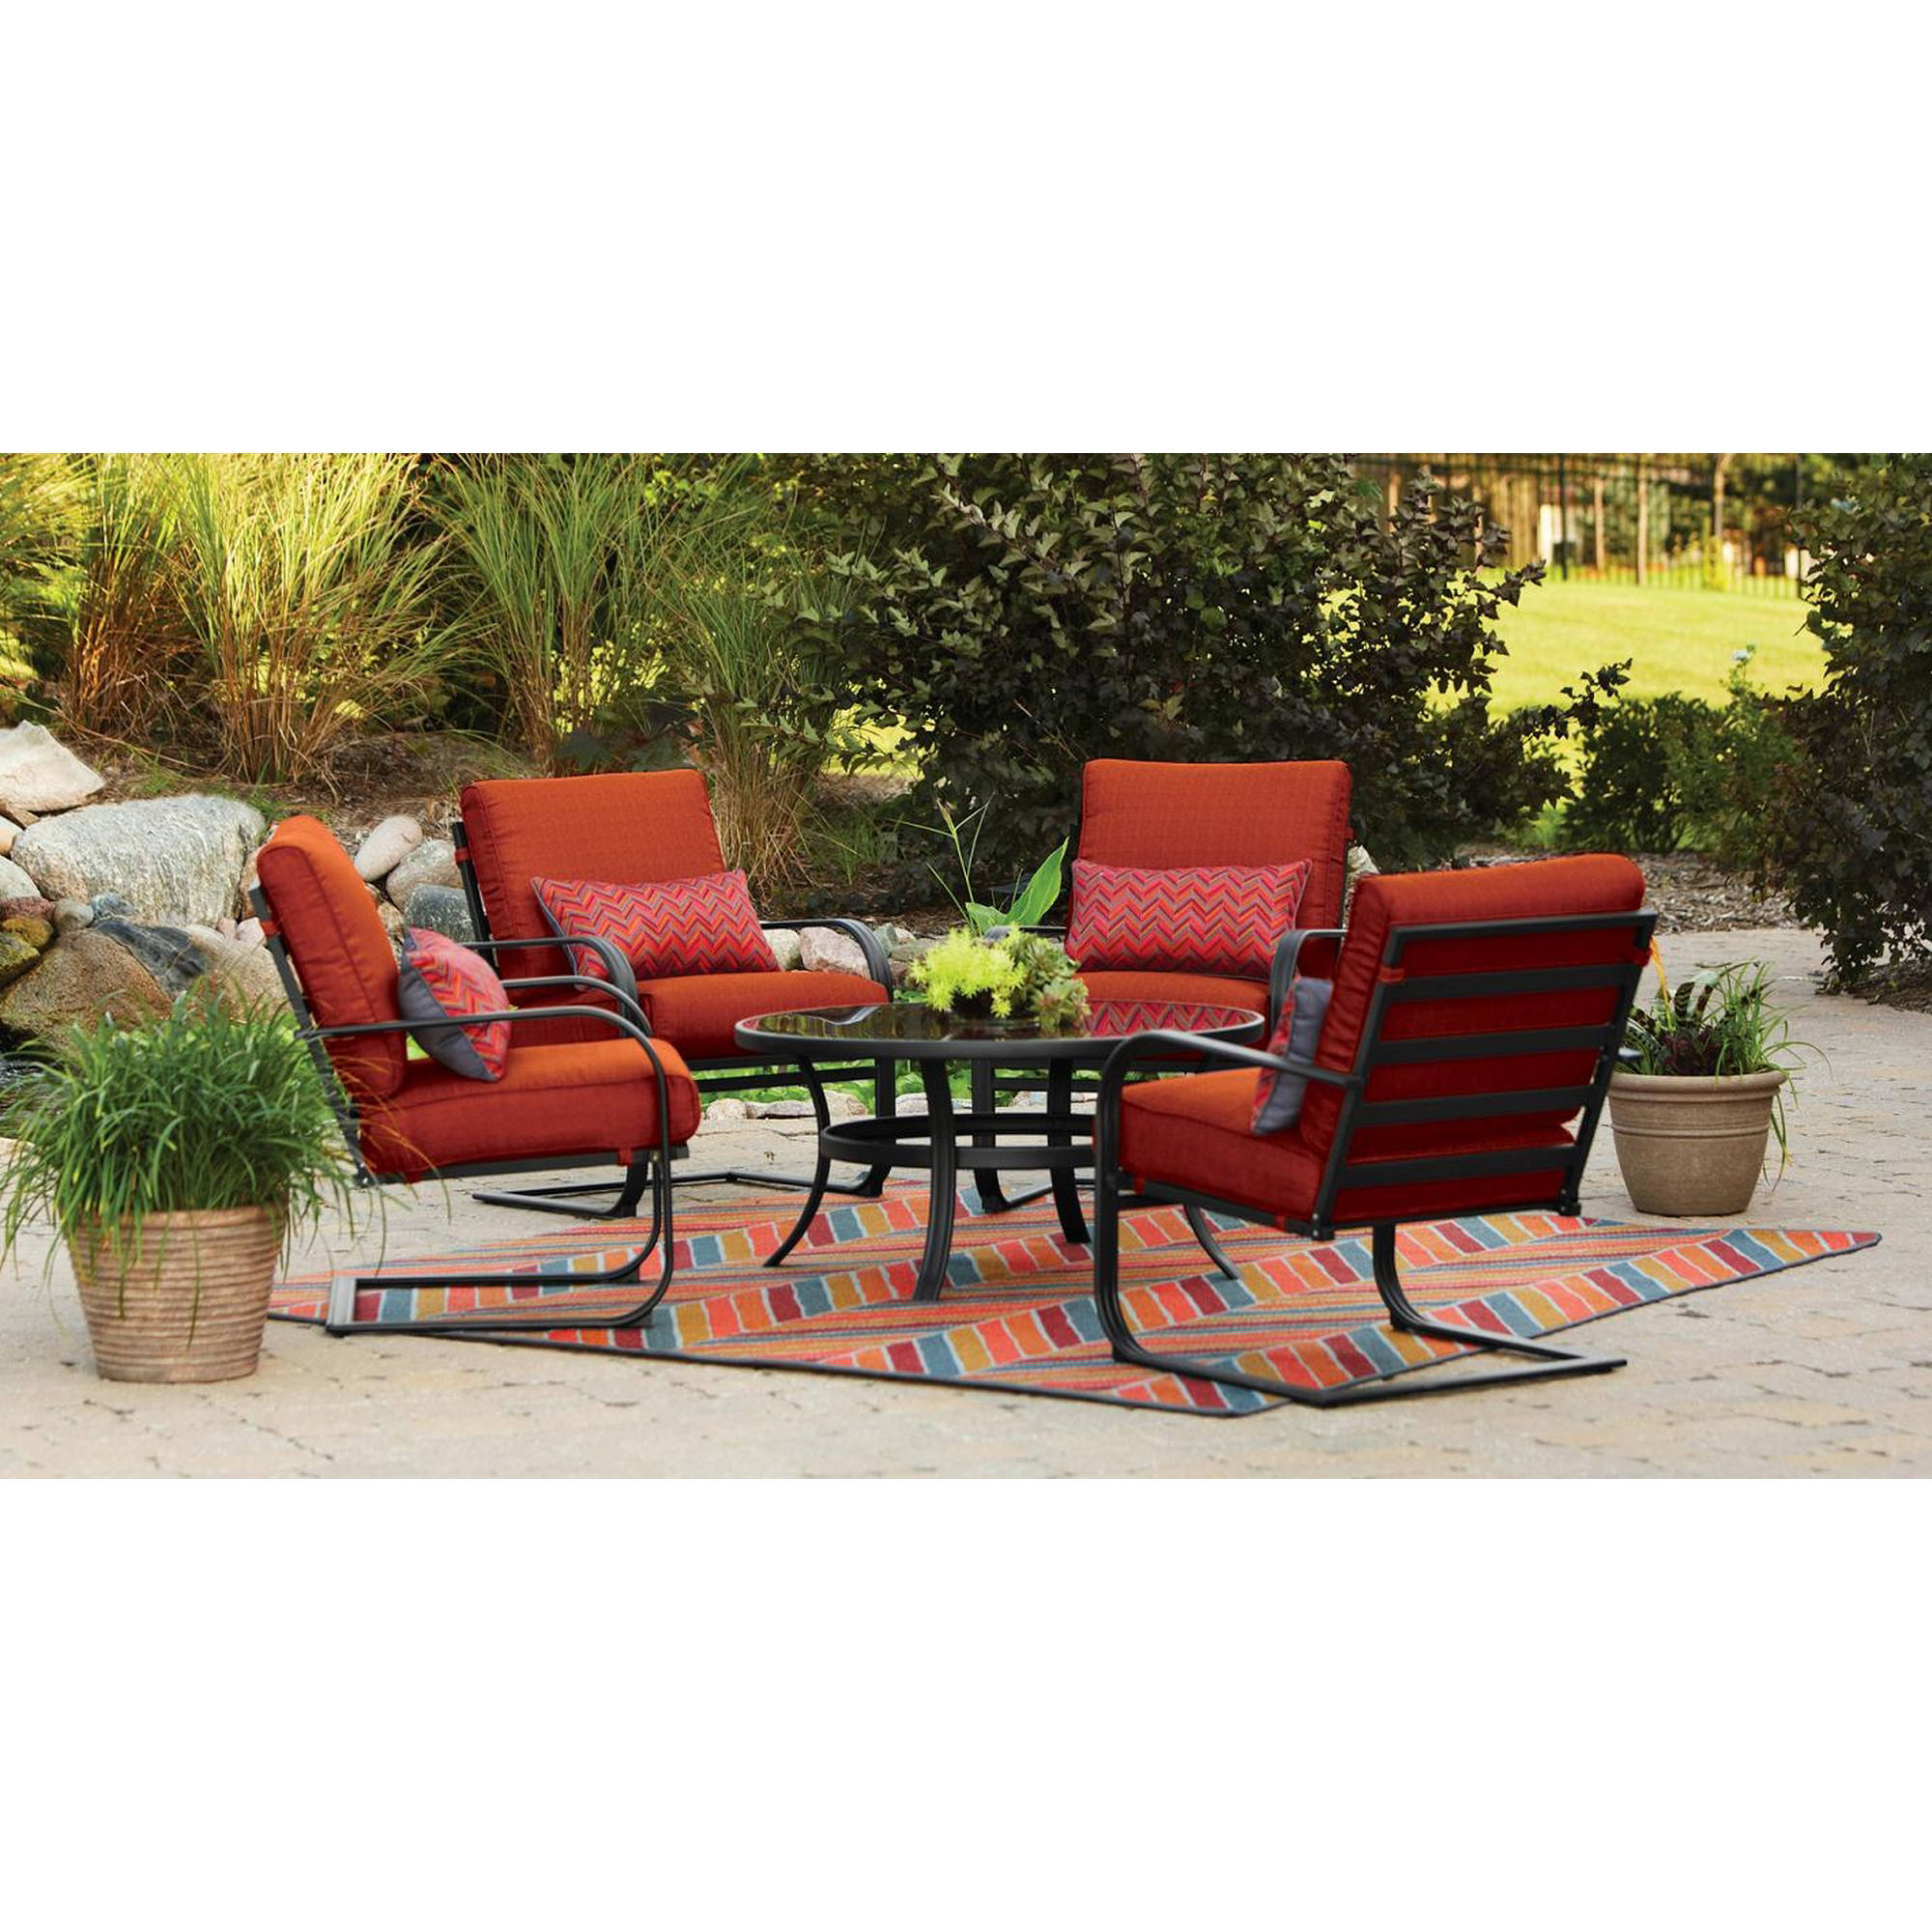 Furniture Cozy Outdoor Furniture Design With Mainstays intended for size 2000 X 2000